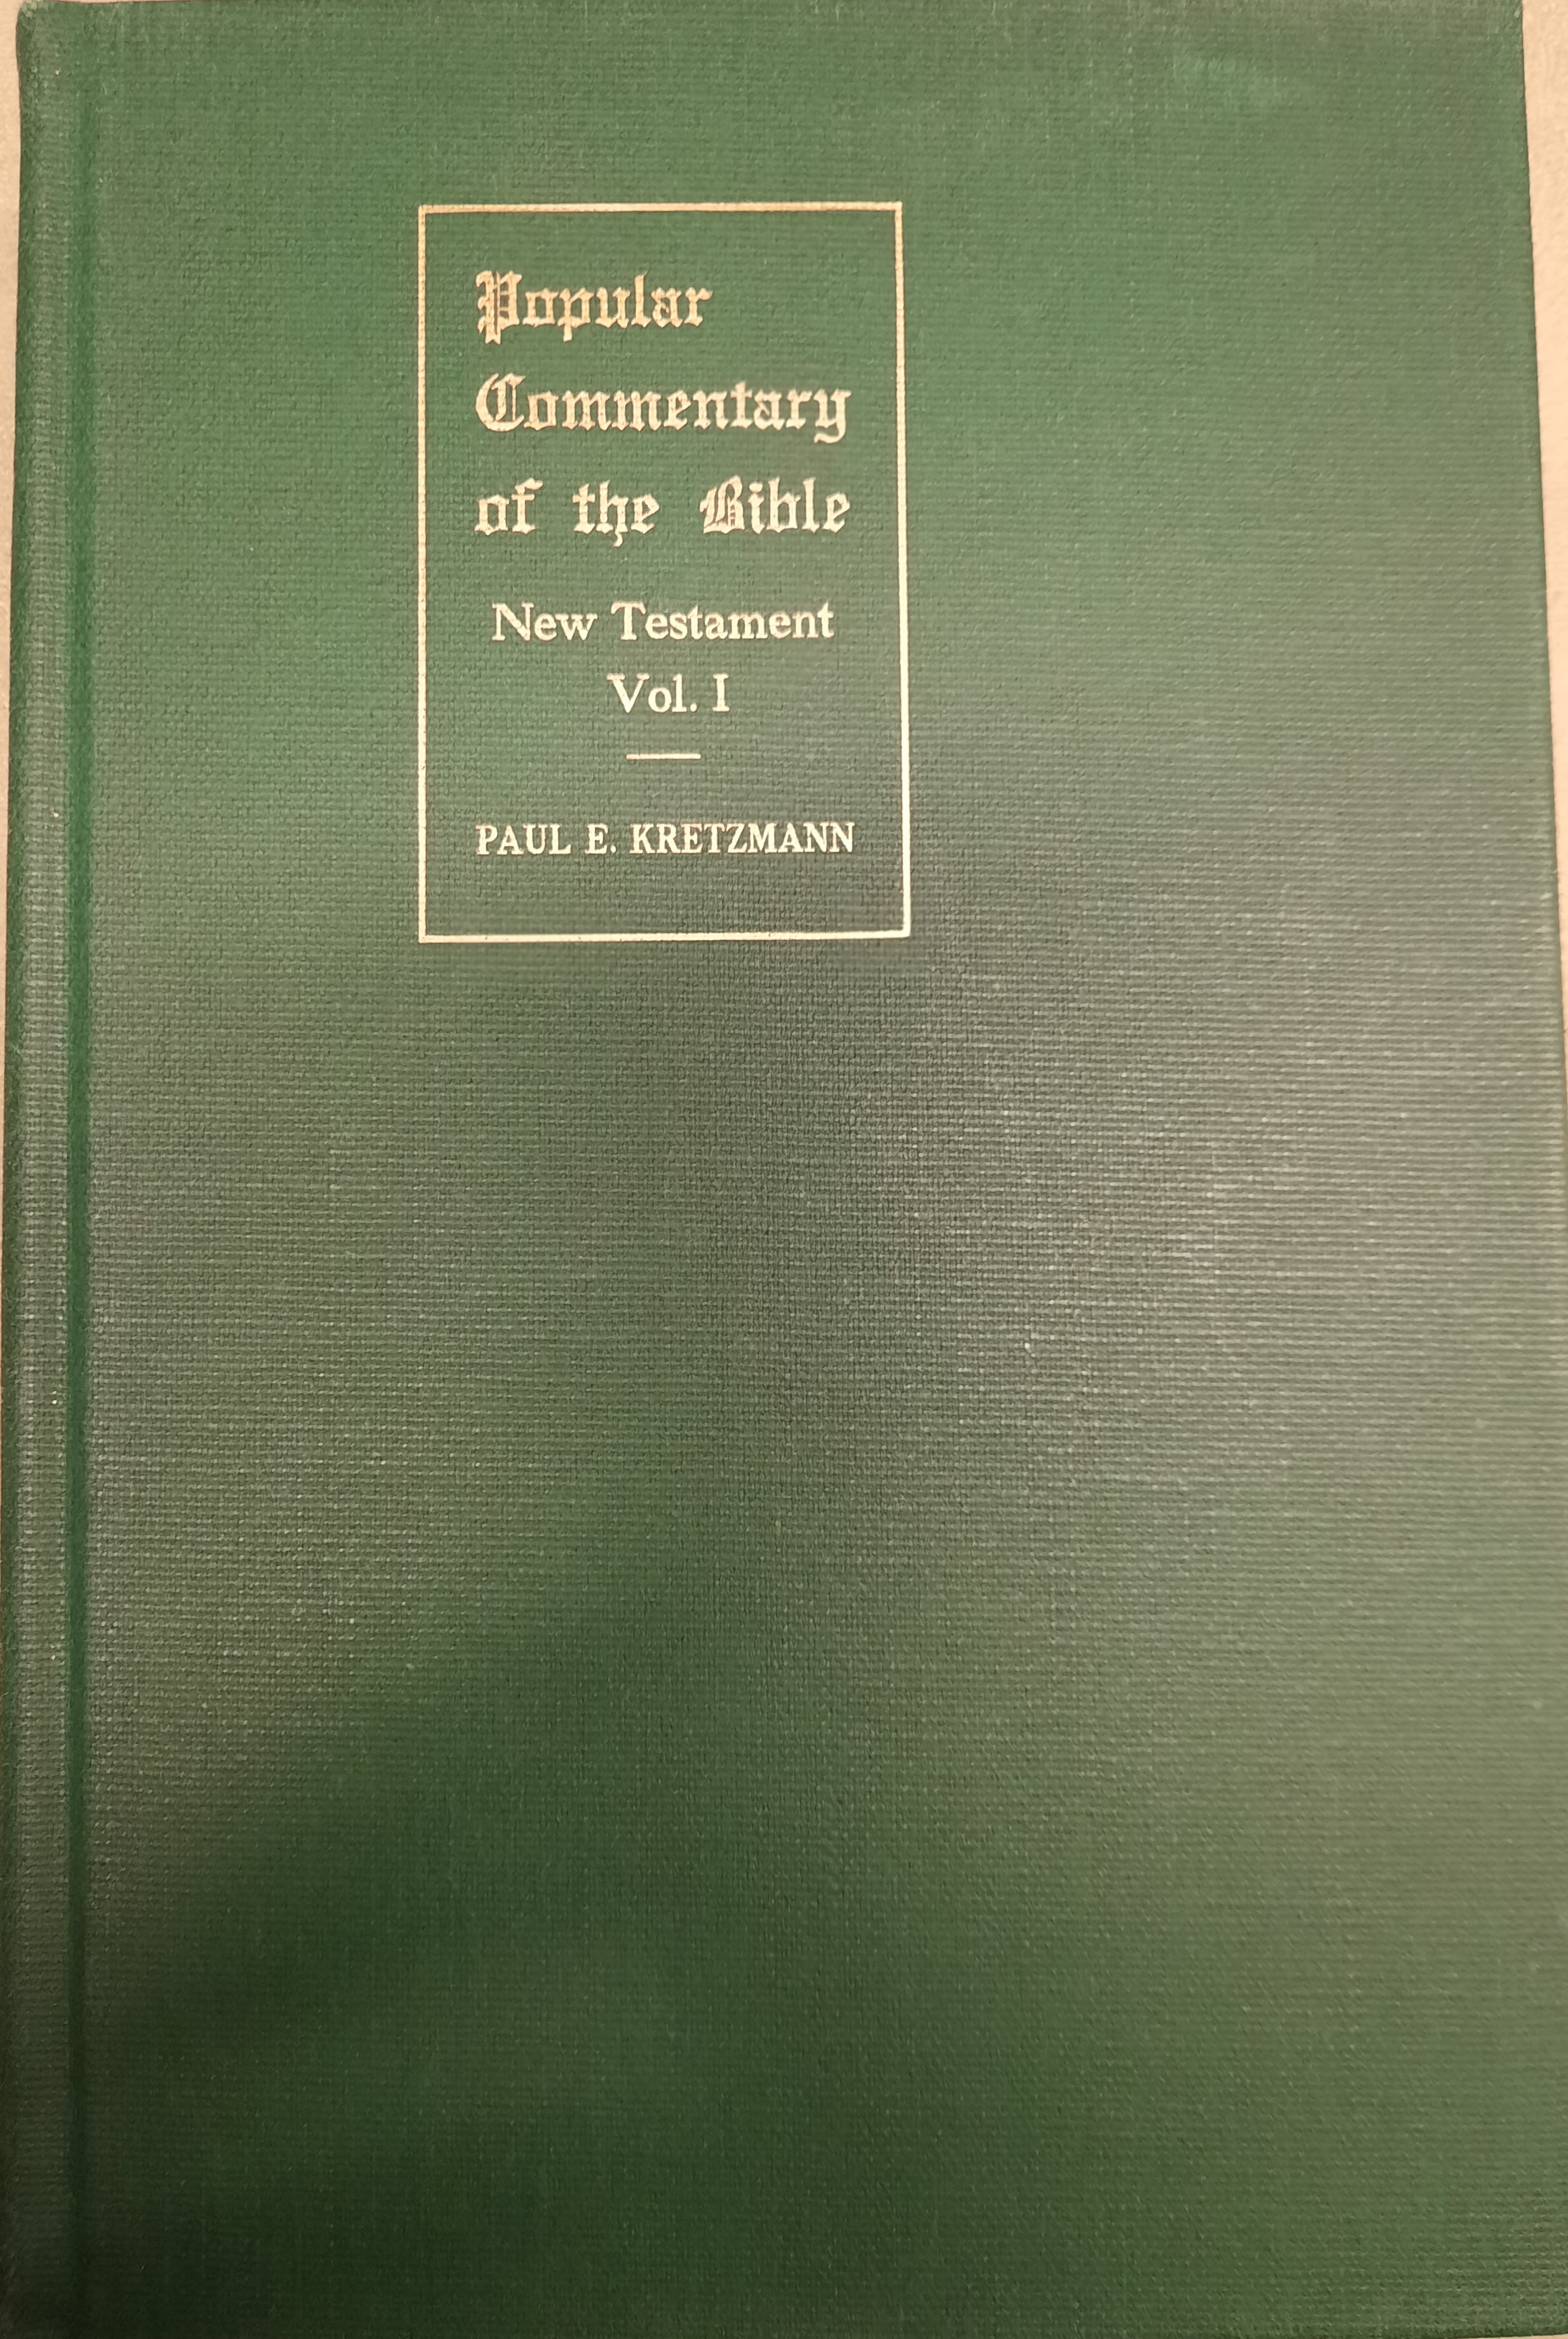 Popular Commentary of the Bible New Testament Vol. I